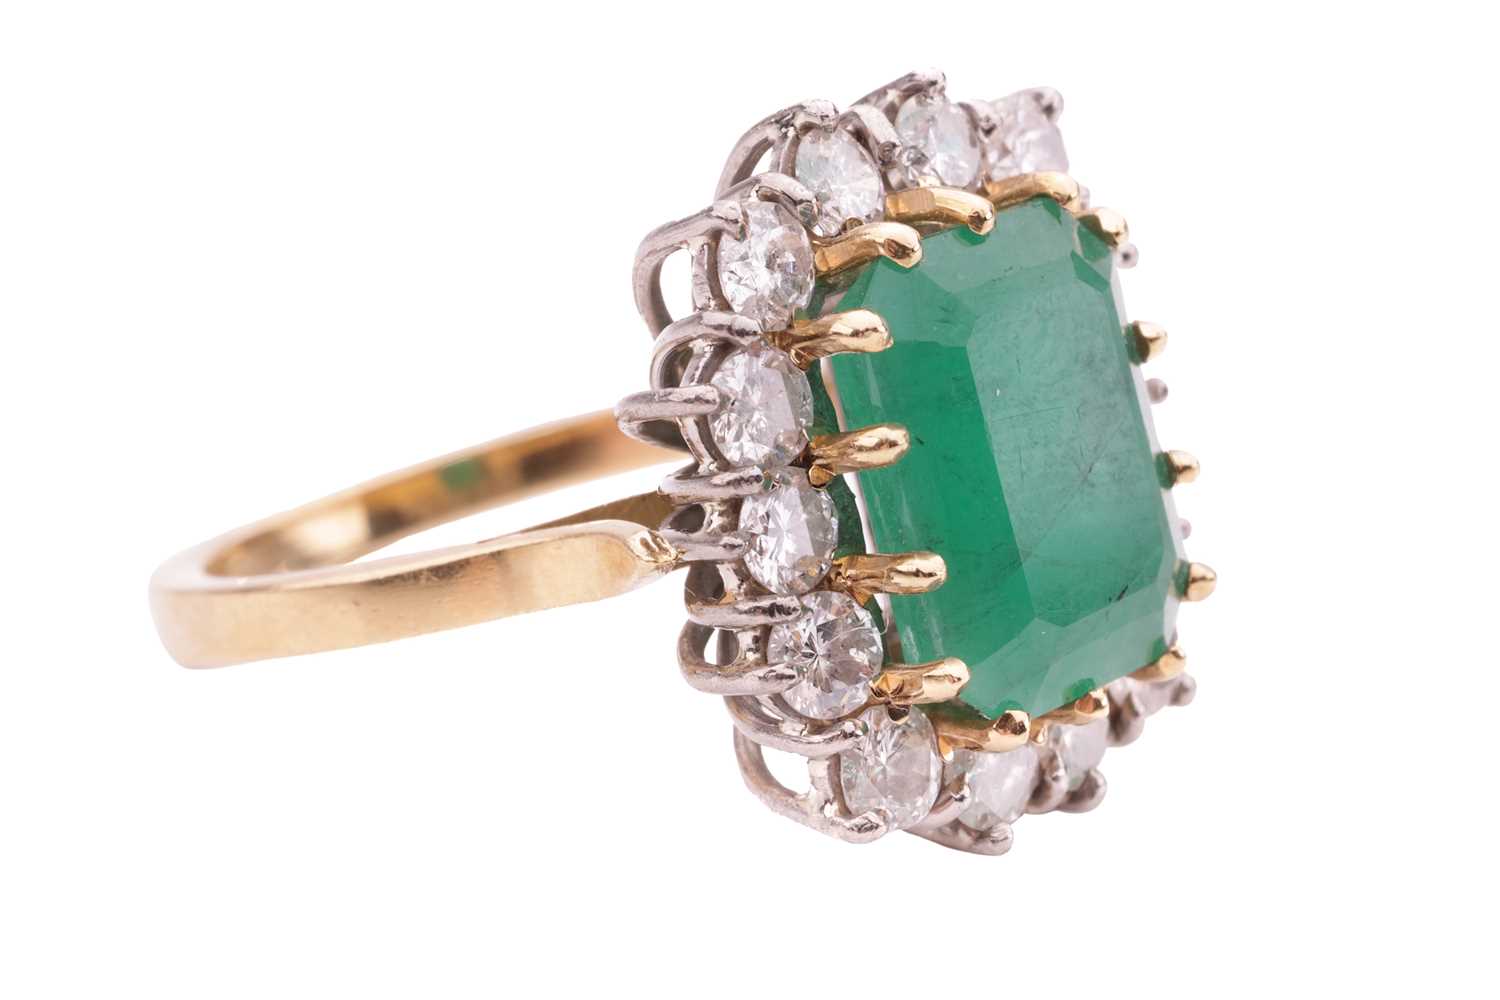 An emerald and diamond cluster ring, set with an emerald measuring 10.8 x 8.2 x 5.2mm, encircled by  - Image 4 of 4